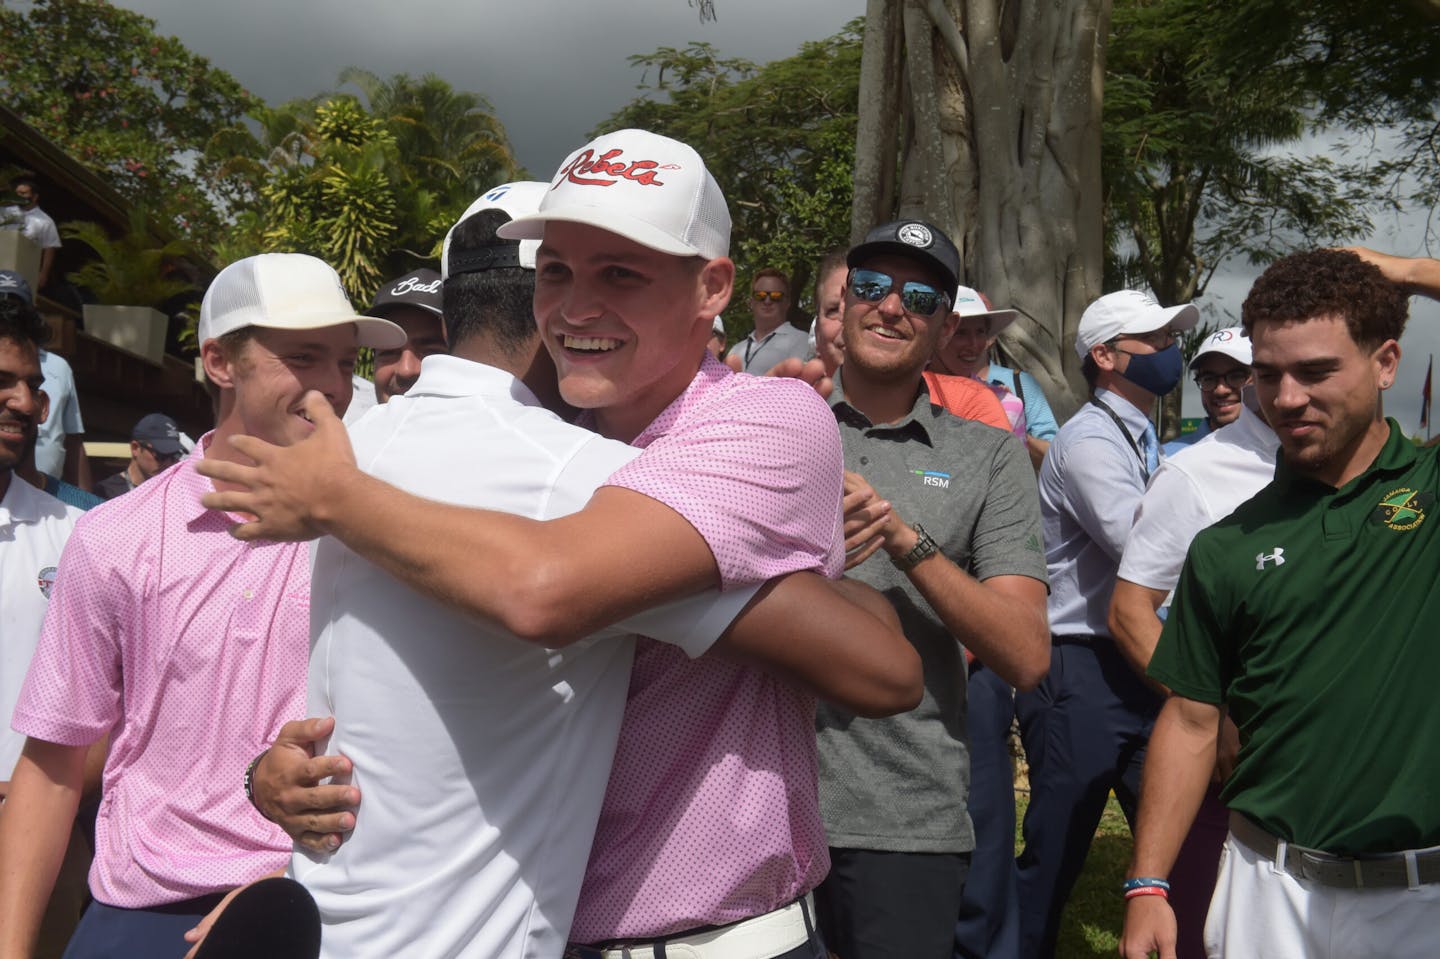 La Romana, DOMINICAN REPUBLIC: Aaron Jarvis of Cayman Islands pictured at the 2022 Latin America Amateur Championship at Casa de Campo Resort during Final Round on January 23rd, 2022.